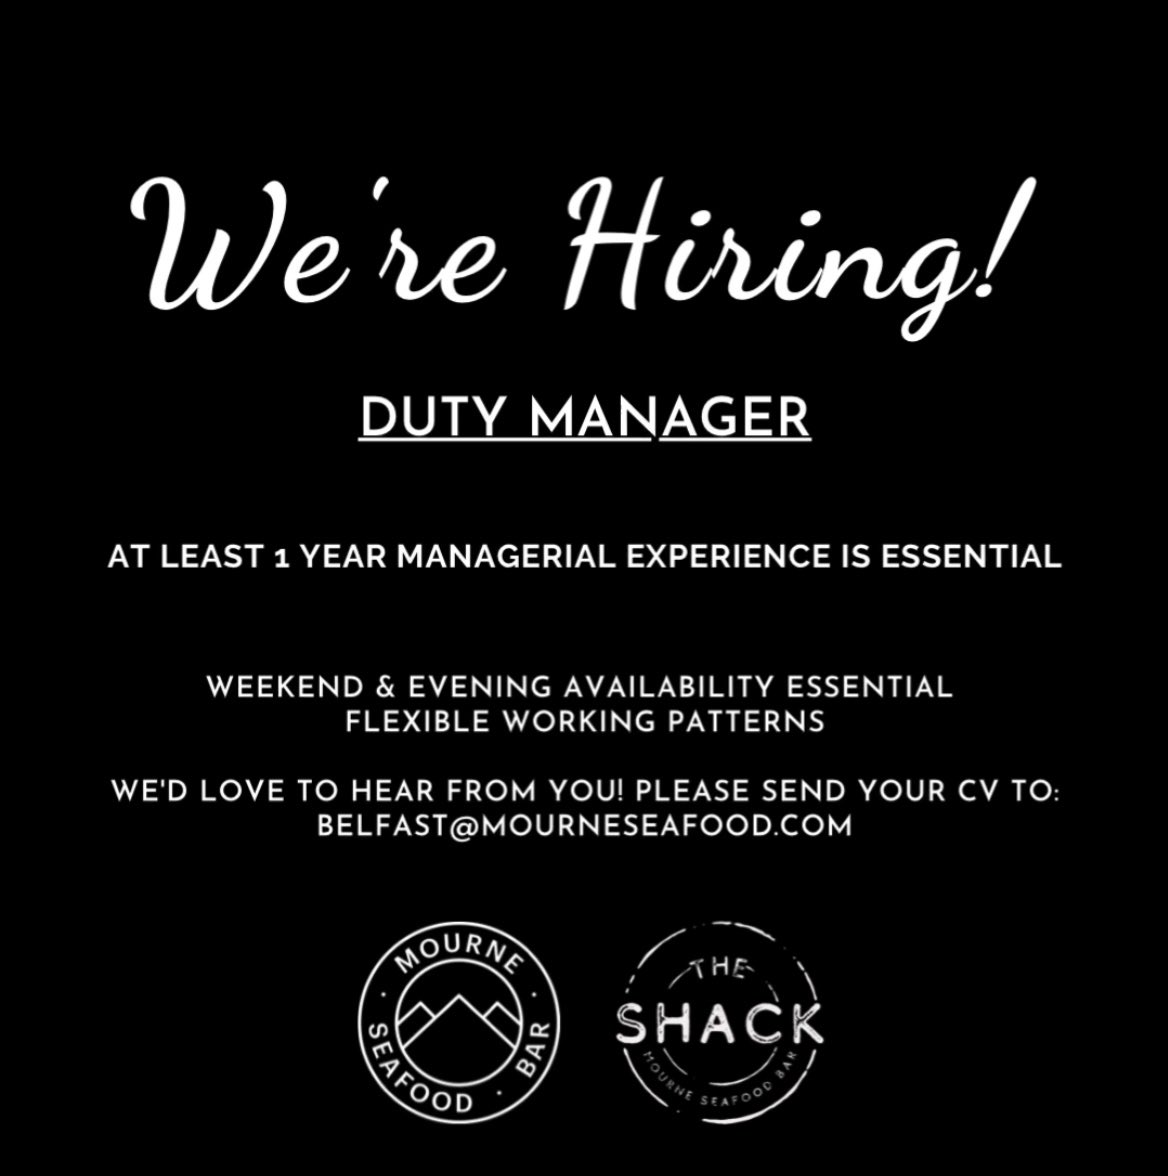 We’re currently on the hunt for a duty manager here at Mourne and The Shack. If this sounds like it would be up your street, email your cv with a short cover letter on why you think you’d be a good fit for us to belfast@mourneseafood.com

 #jobsbelfast #hospitalitybelfast